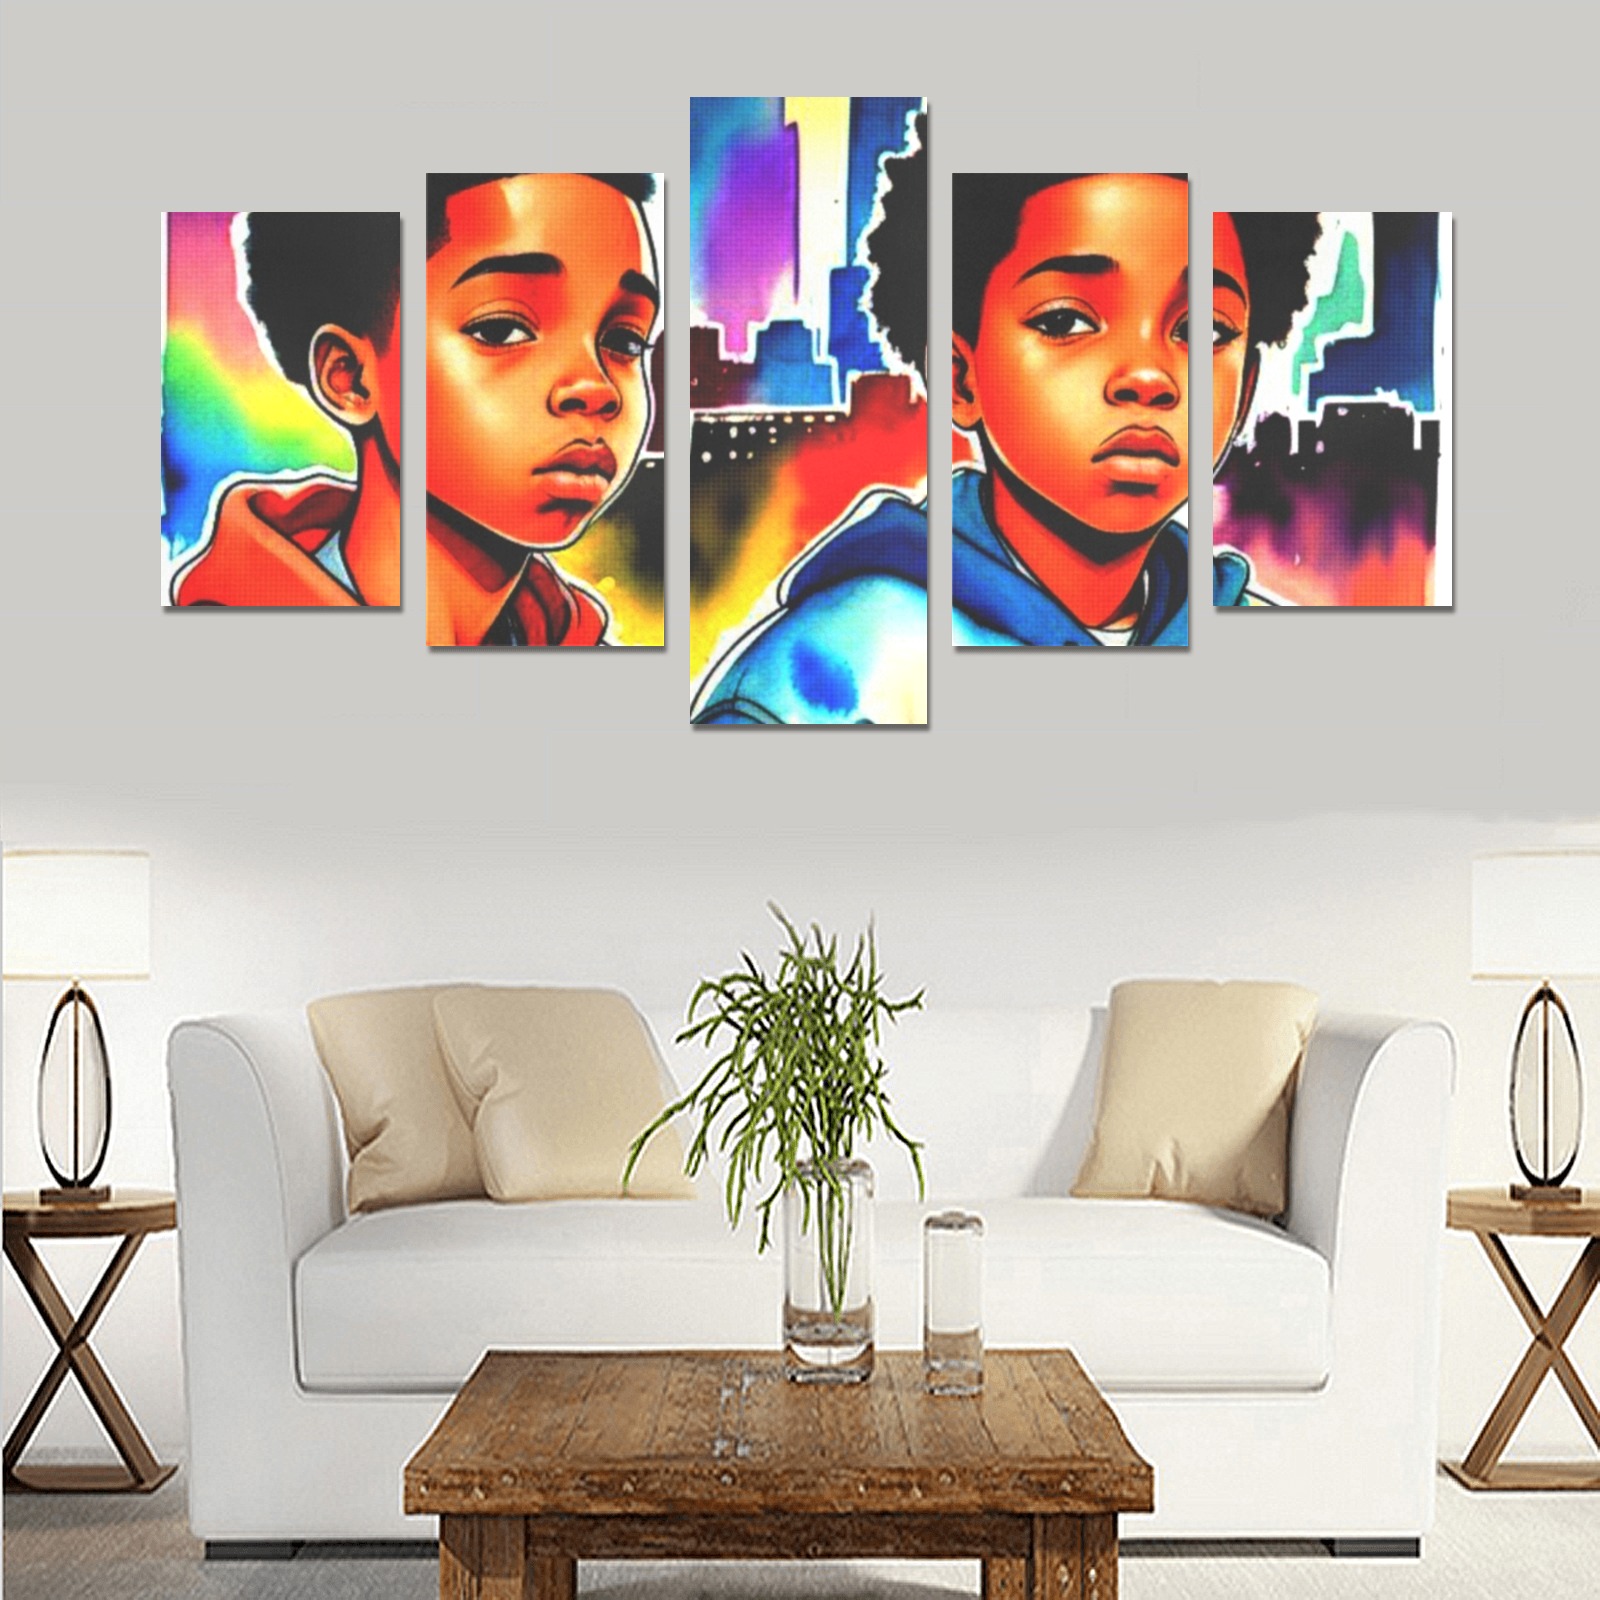 KIDS IN AMERICA 2 Canvas Print Sets C (No Frame)